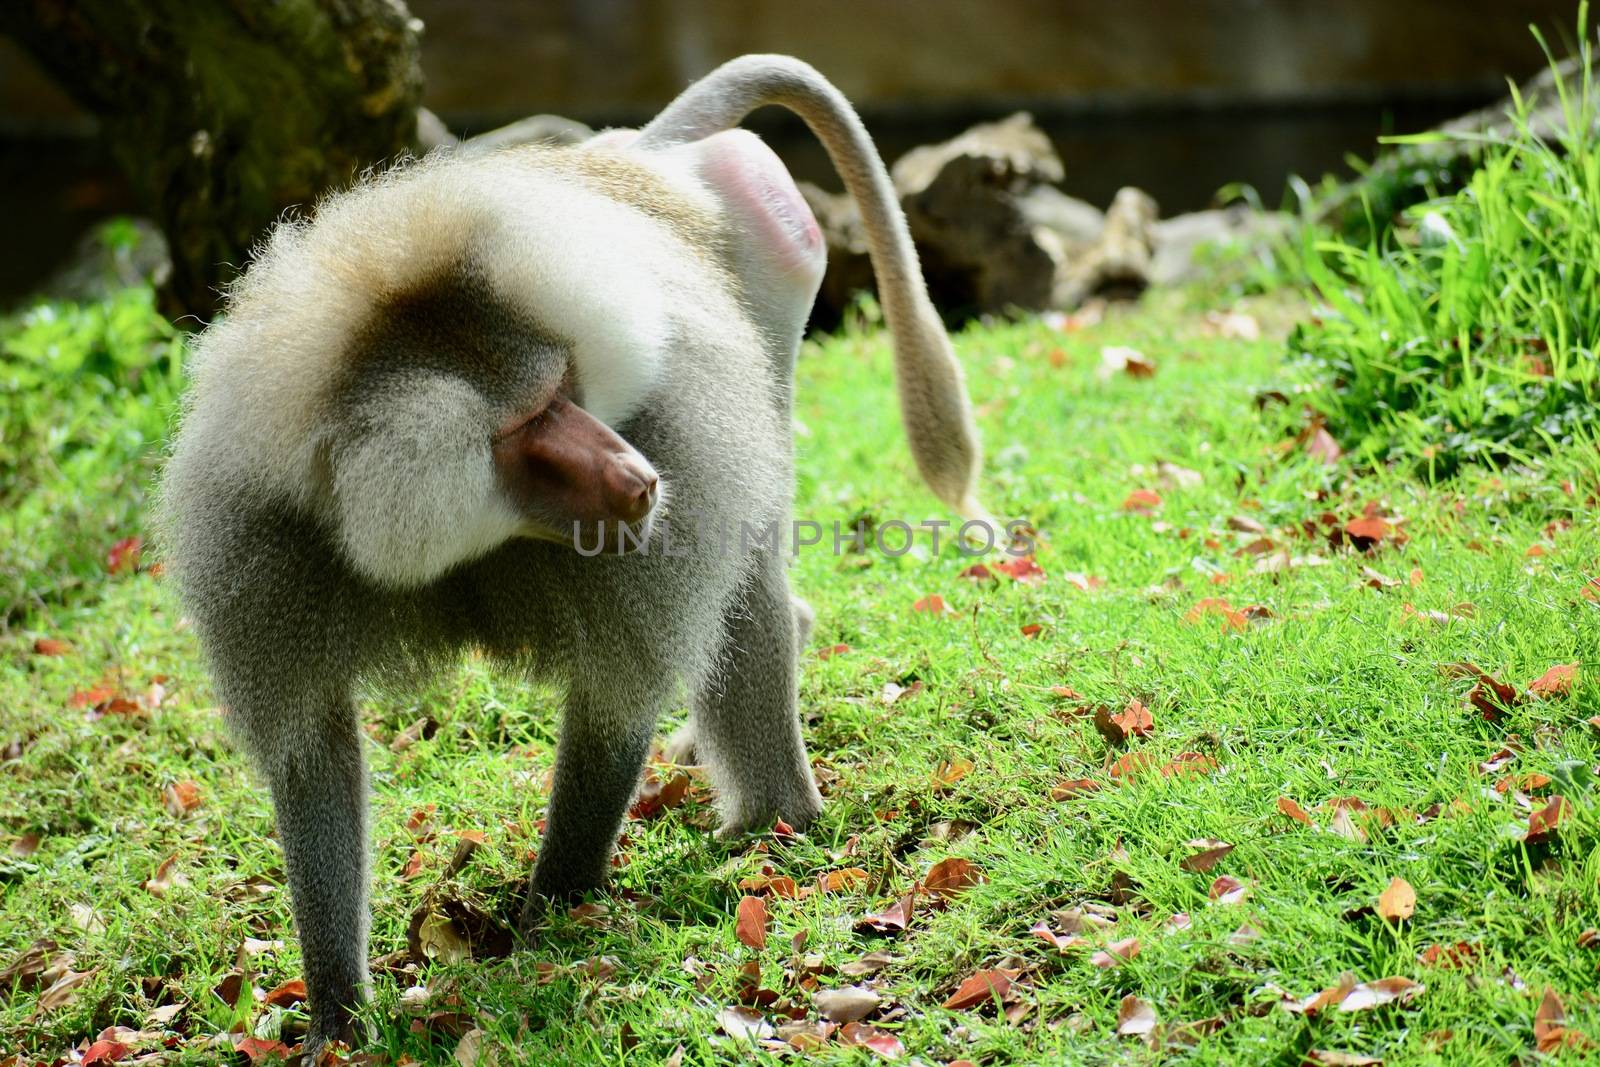 Hamadryas Baboon displays complex social behaviors, and can live in troops of several hundred individuals.